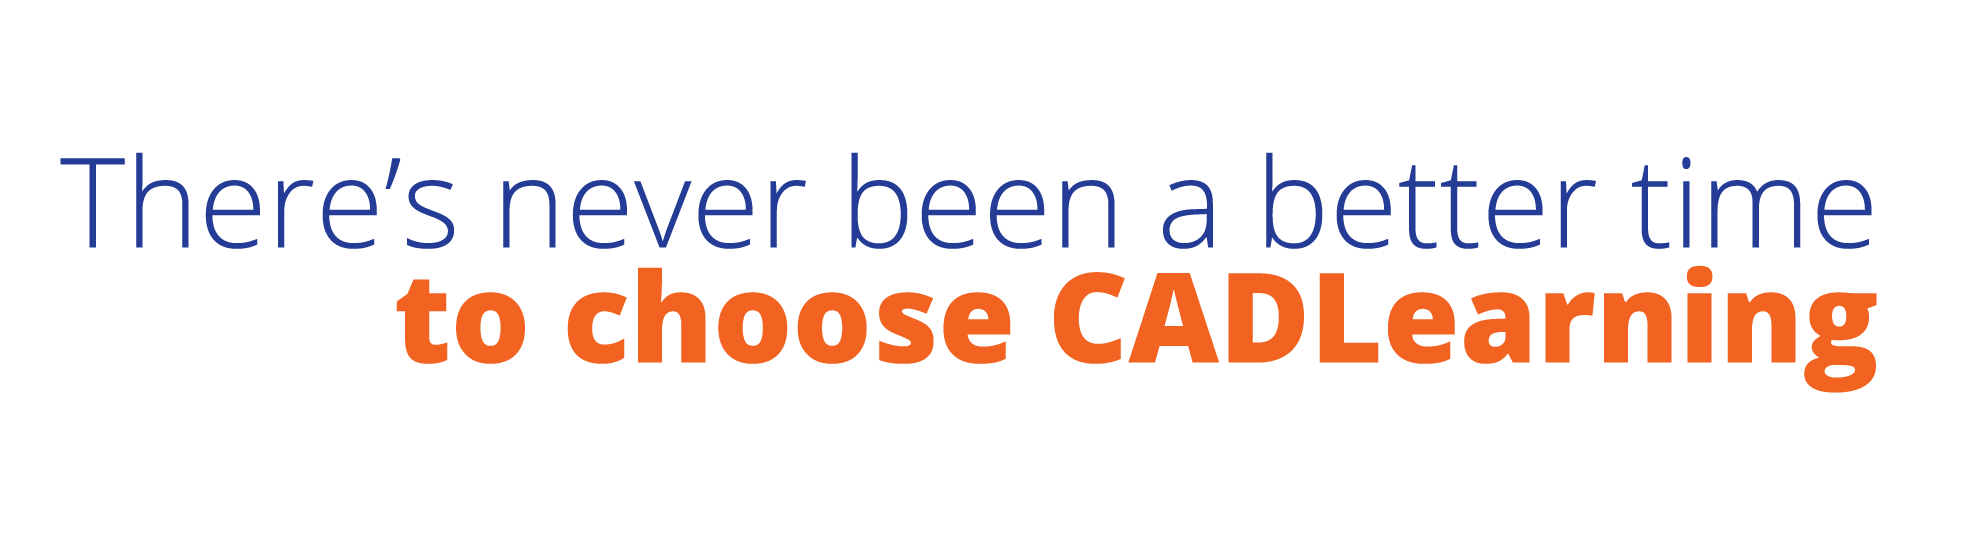 There's never been a better time to choose CADLearning